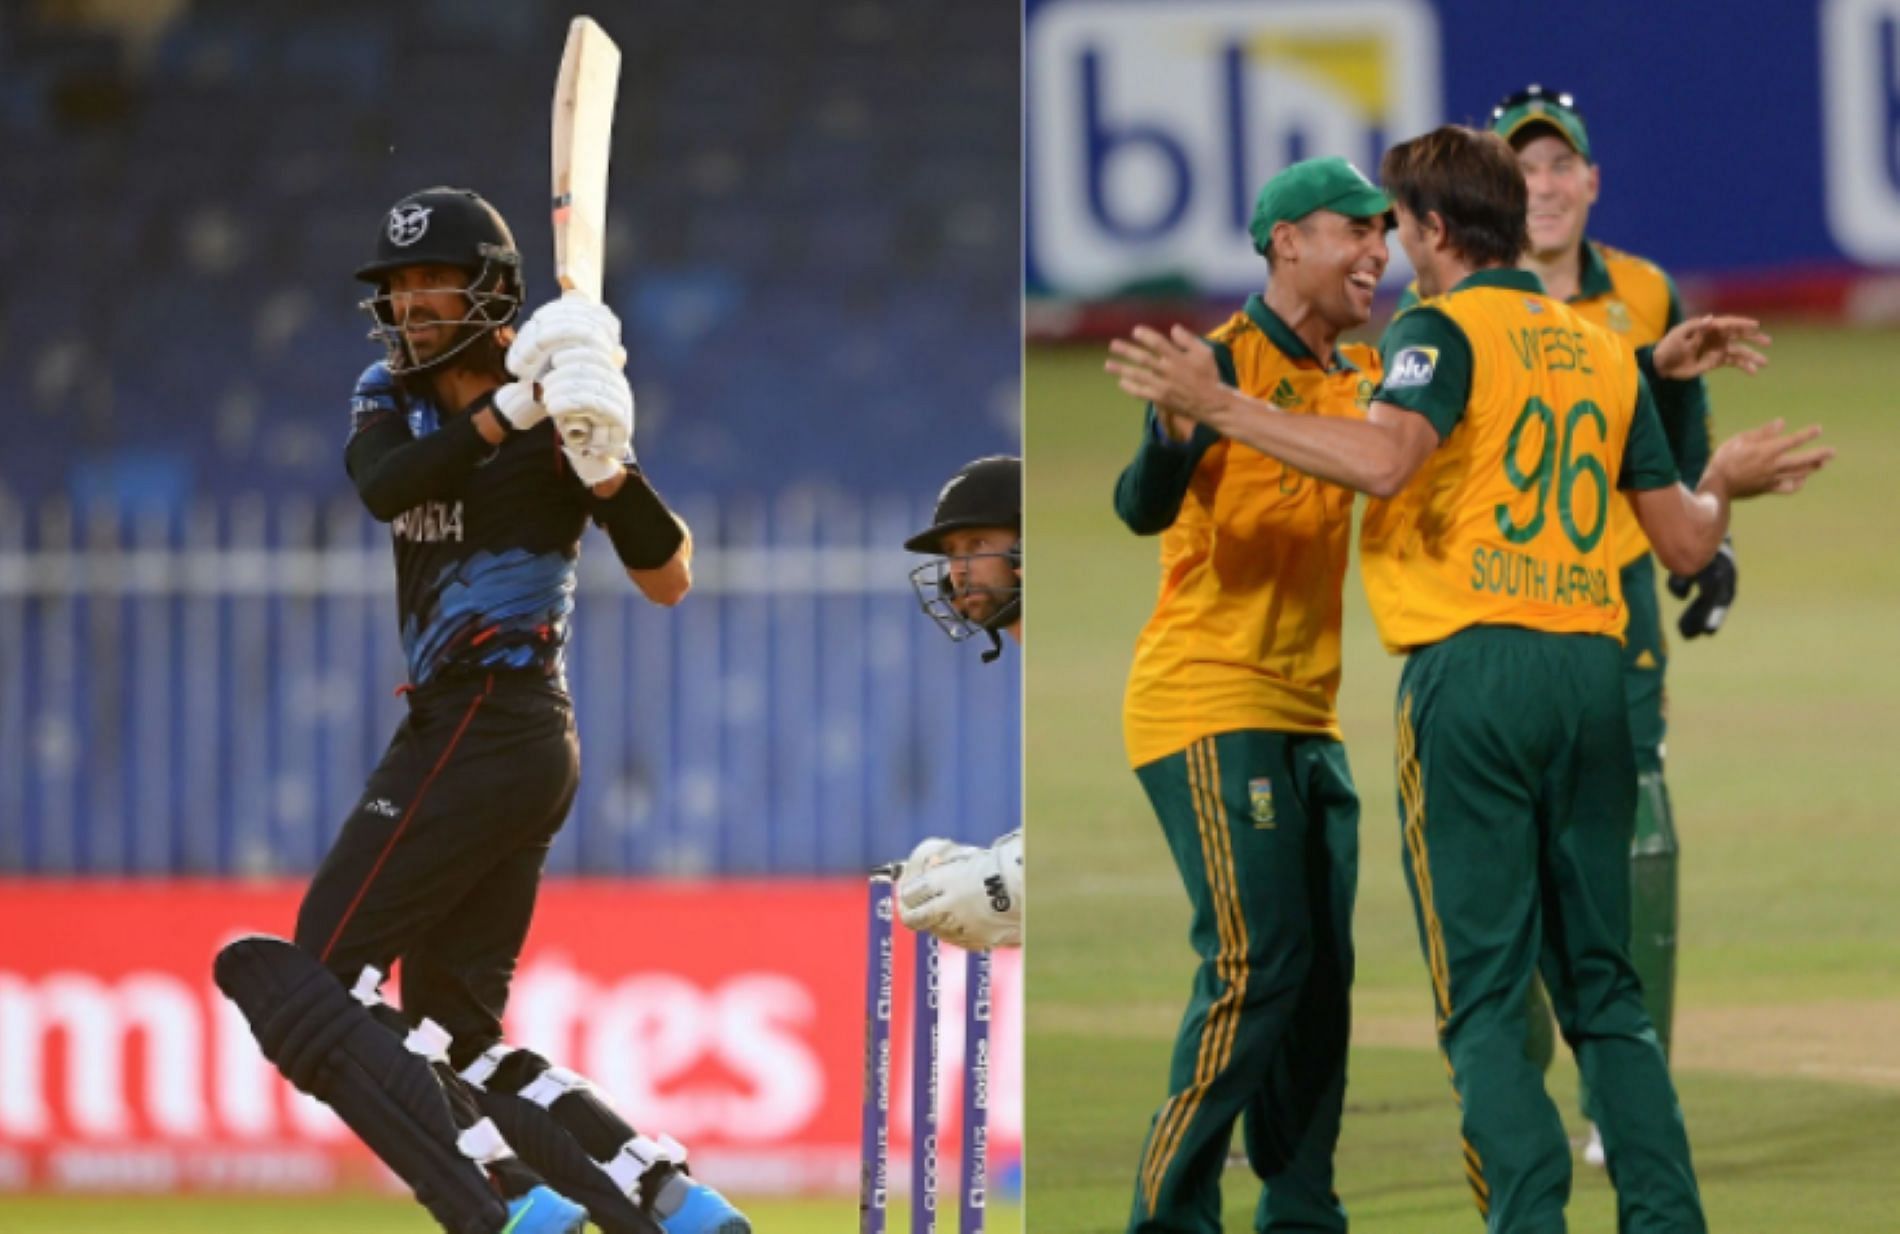 Wiese is one of two players to have played for South Africa and another nation in T20 World Cups